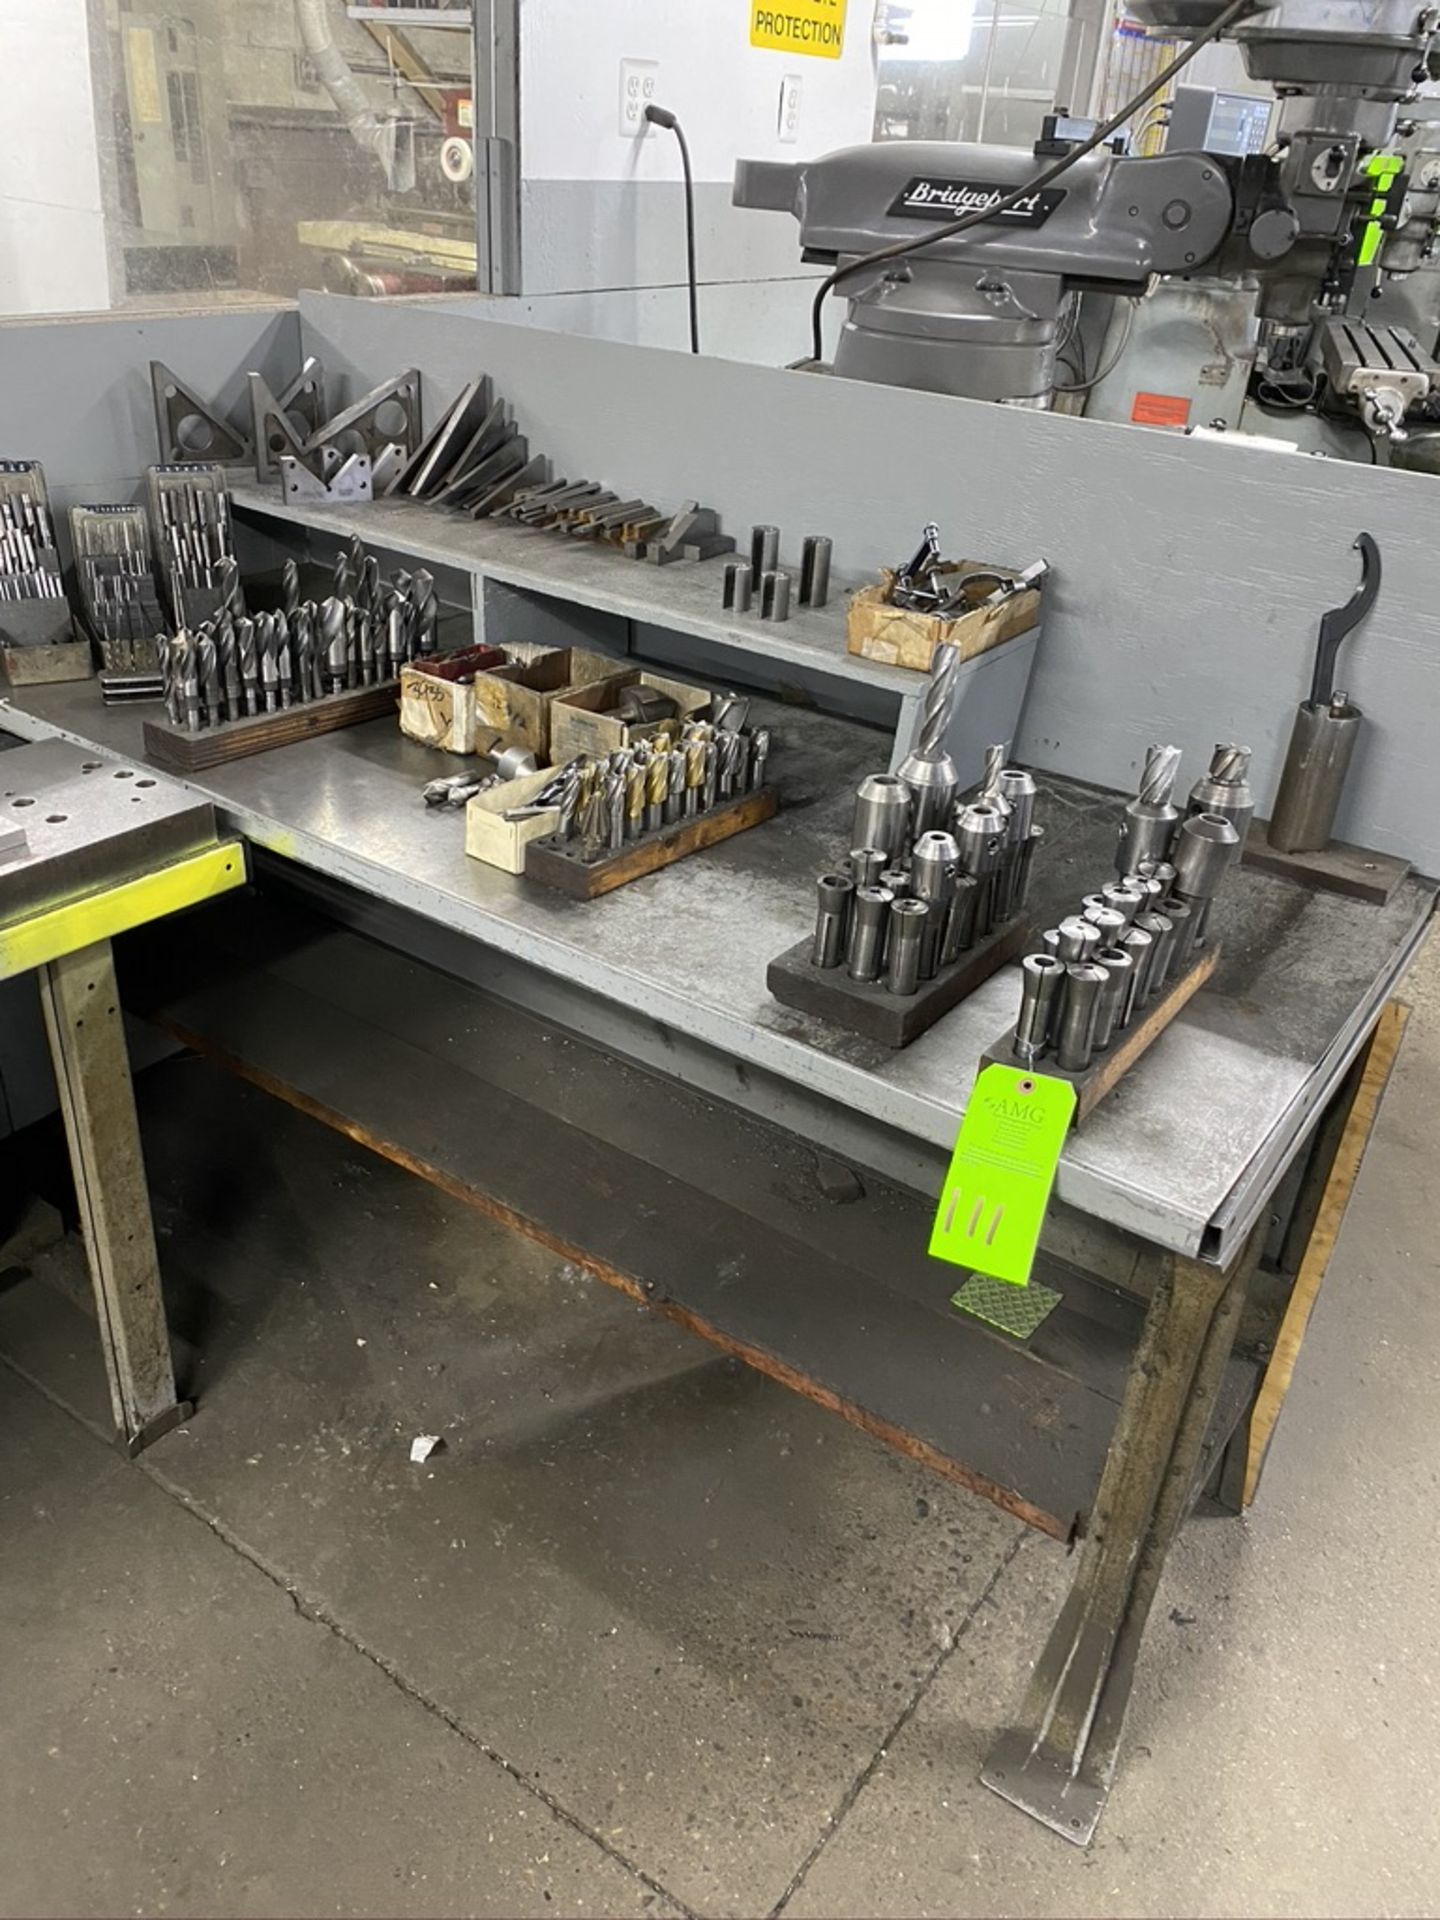 Lot of collets, drills, mills, angle blocks, Including steel table